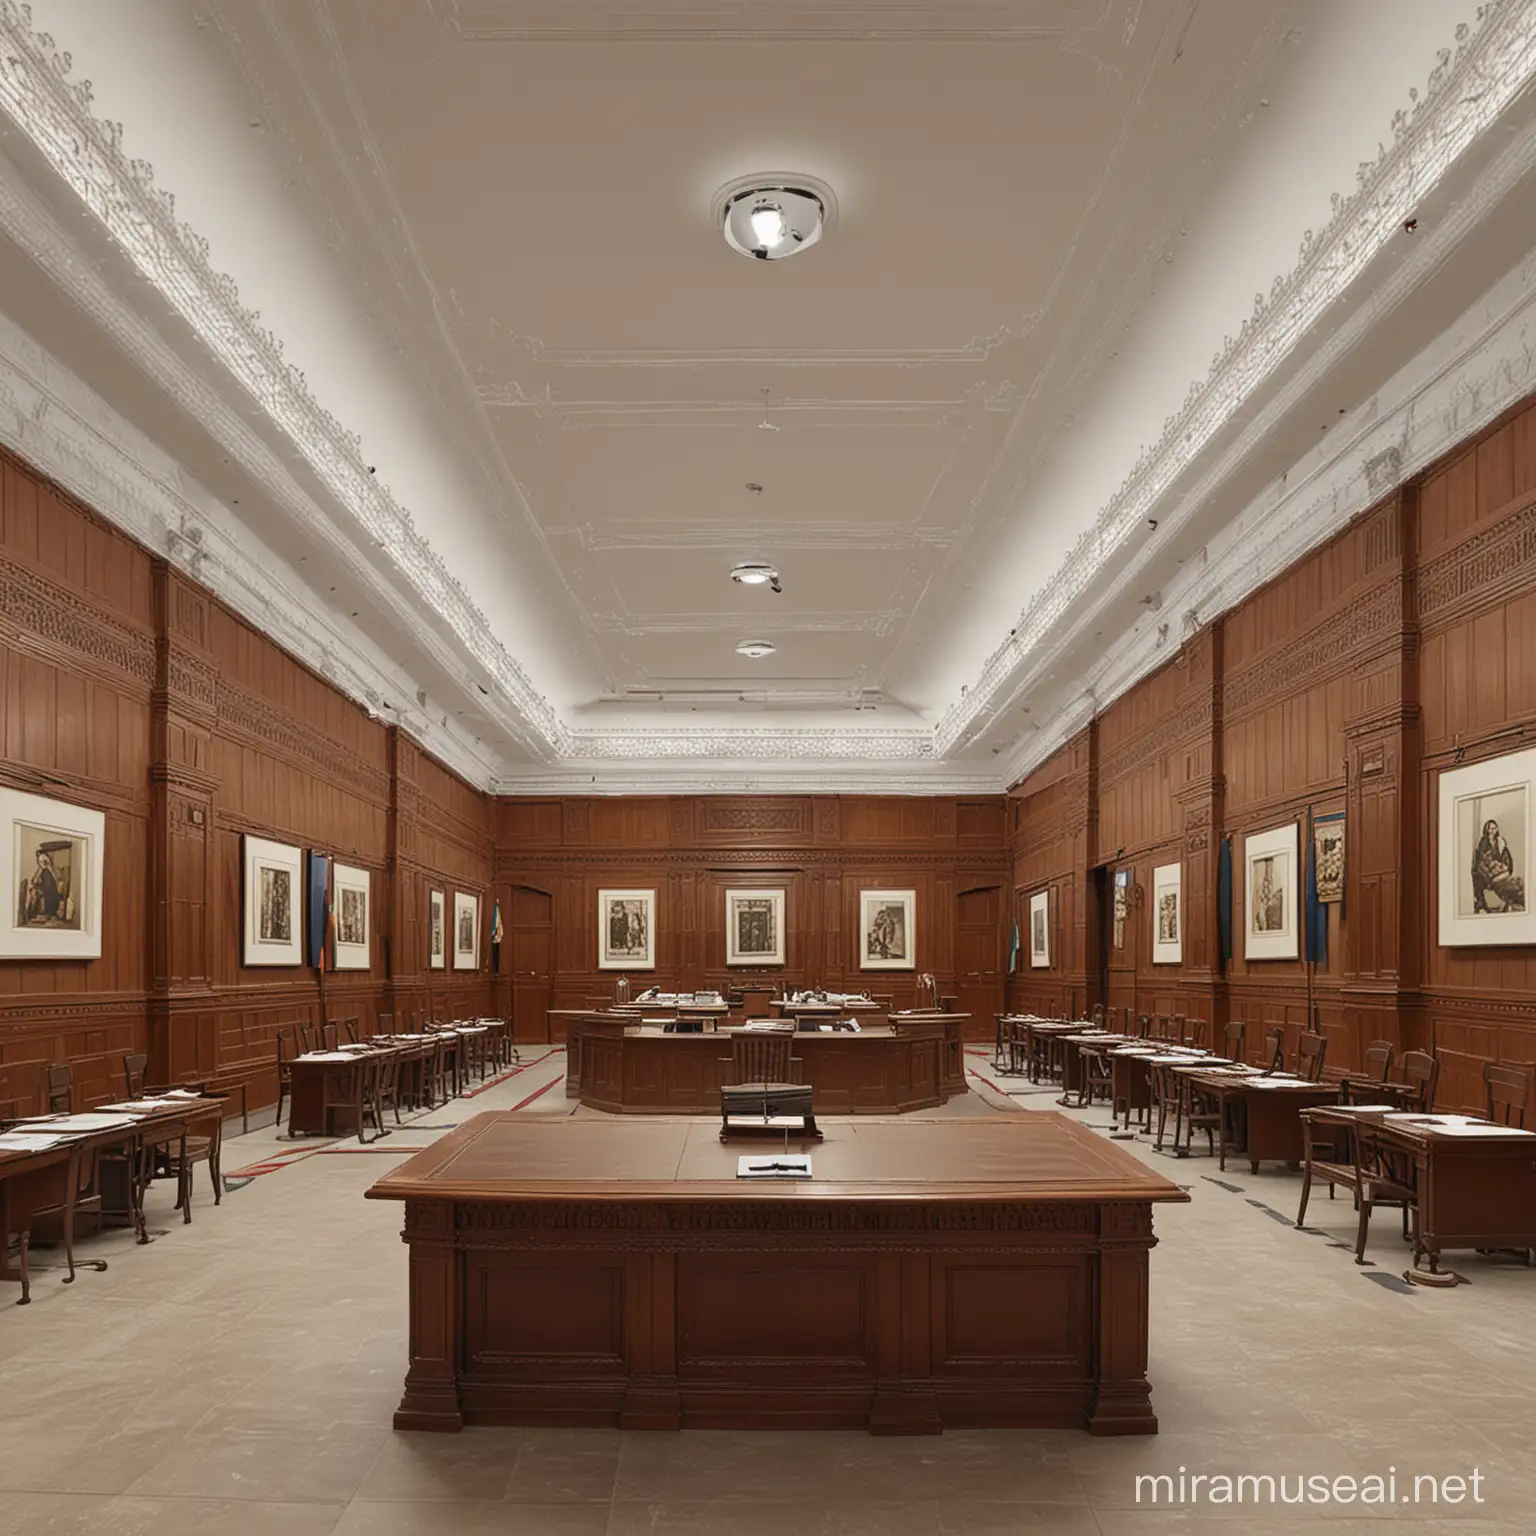 generate an ai image of courtrooms museum with the interior of Rajasthan 